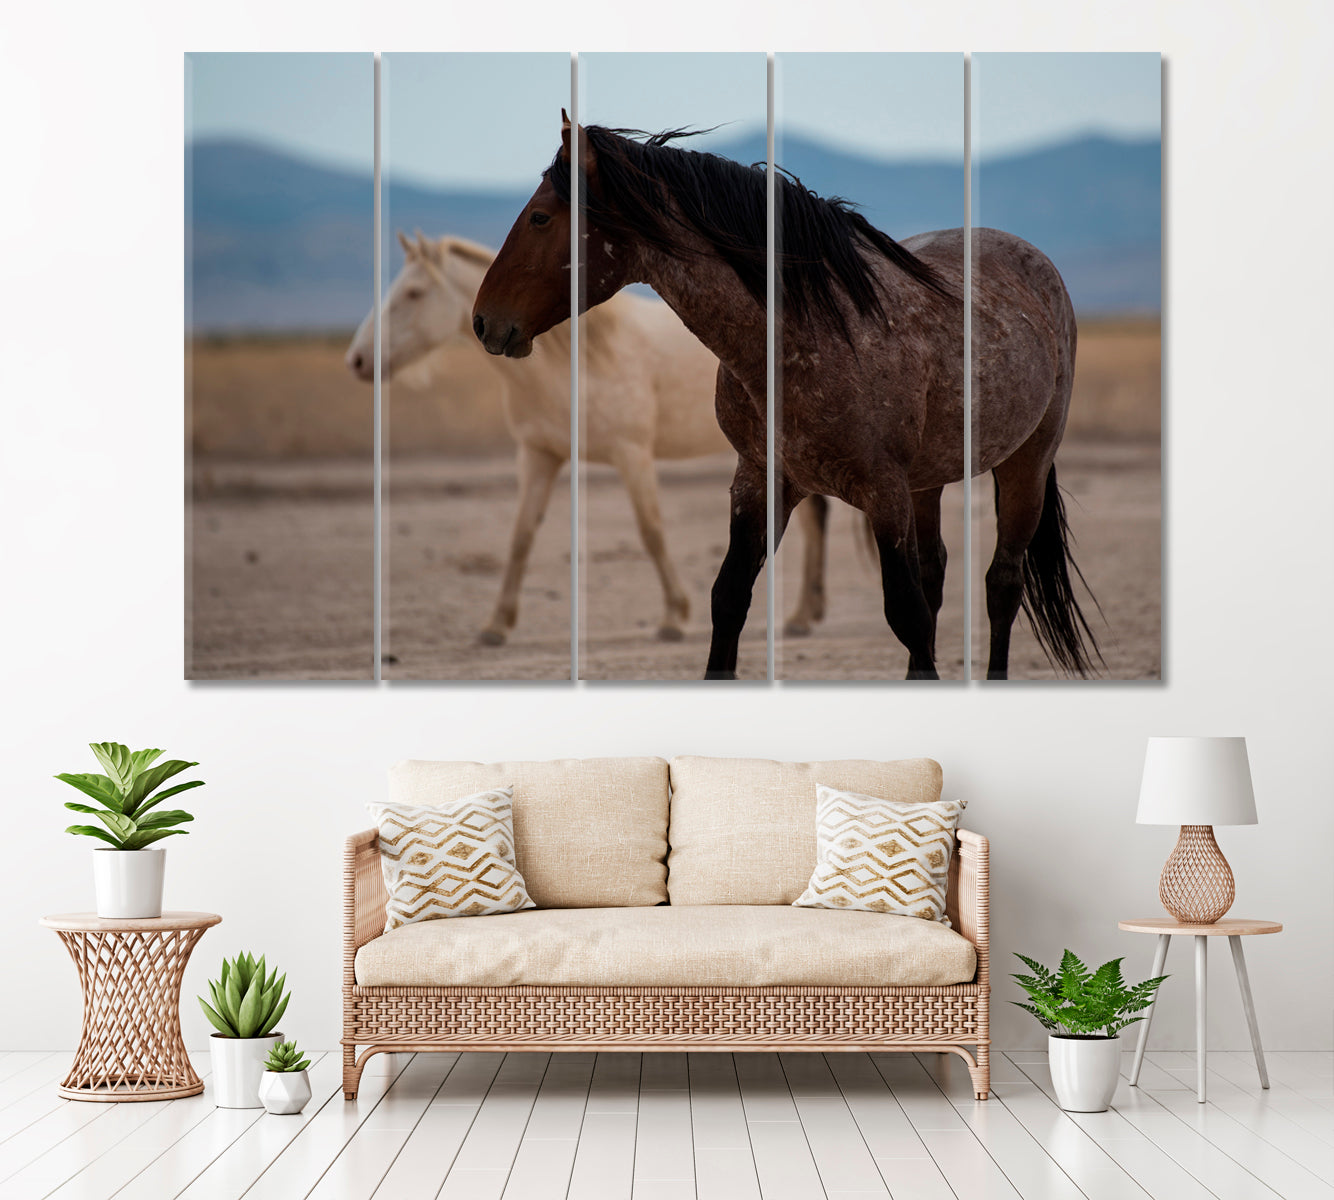 Wild Mustangs in Western Utah USA Canvas Print ArtLexy 5 Panels 36"x24" inches 